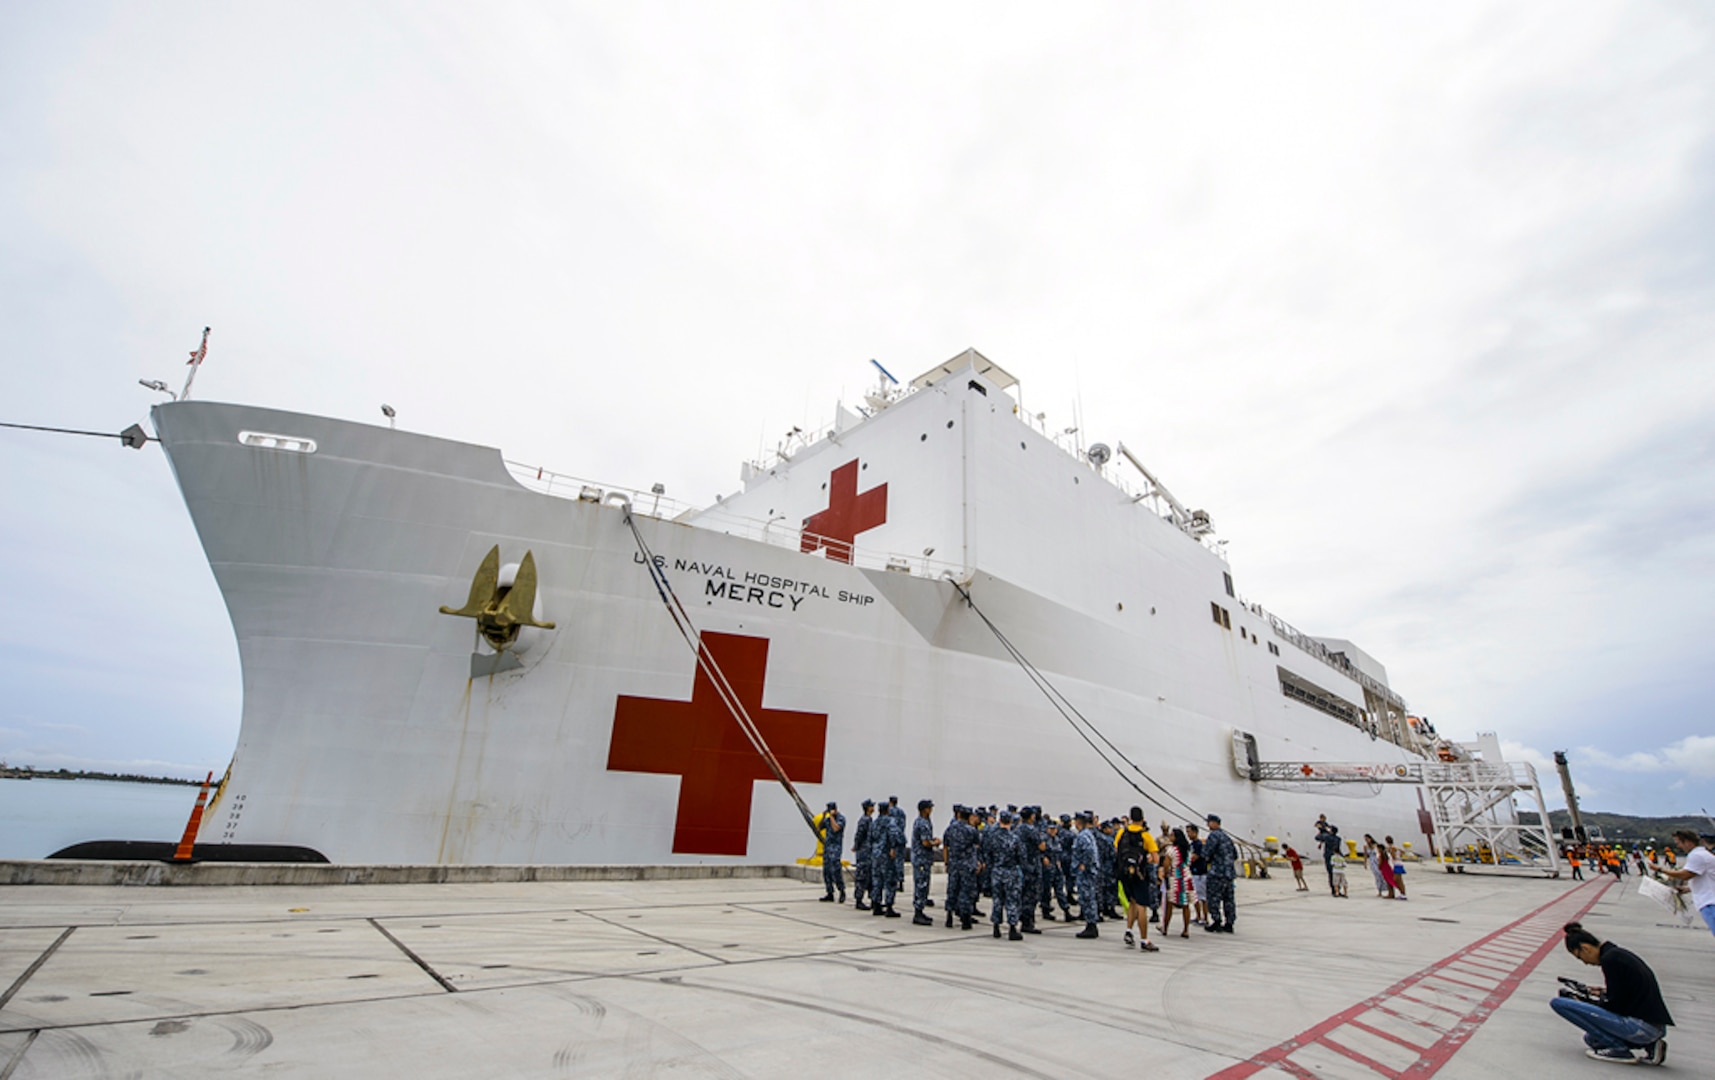 U.S. NAVAL BASE GUAM (Sept. 4, 2015) - The hospital ship USNS Mercy (T-AH 19) is docked at a pier at Naval Base Guam during Pacific Partnership 2015. Mercy made a port visit to Guam to offload personnel deployed aboard the ship for the past four months for PP15. Pacific Partnership is in its 10th iteration and is the largest annual multilateral humanitarian assistance and disaster relief preparedness mission conducted in the Indo-Asia-Pacific region. While training for crisis conditions, Pacific Partnership missions to date have provided real world medical care to approximately 270,000 patients and veterinary services to more than 38,000 animals. Additionally, the mission has provided critical infrastructure development to host nations through more than 180 engineering projects. 